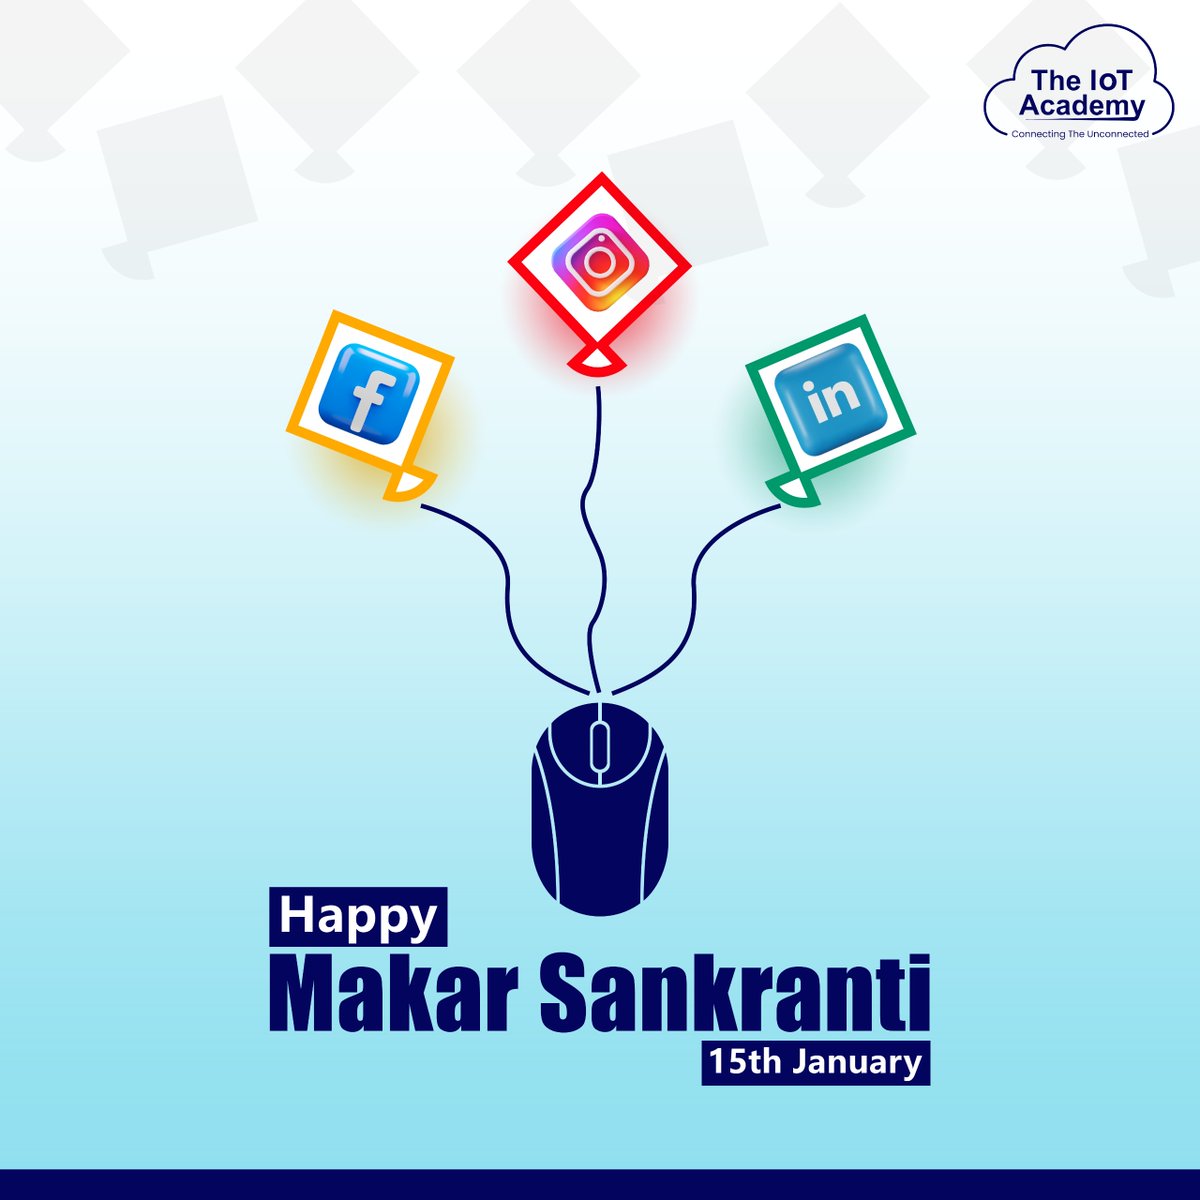 🪁 Soaring high with joy on this Makar Sankranti, as vibrant kites paint the sky with the colors of cheerfulness and togetherness! 🌈✨
.
.
.
#TheIoTAcademy #edtech #education #MakarSankranti #KiteFestival #HarvestFestival #SankrantiVibes #IndianFestival #CelebratingTraditions